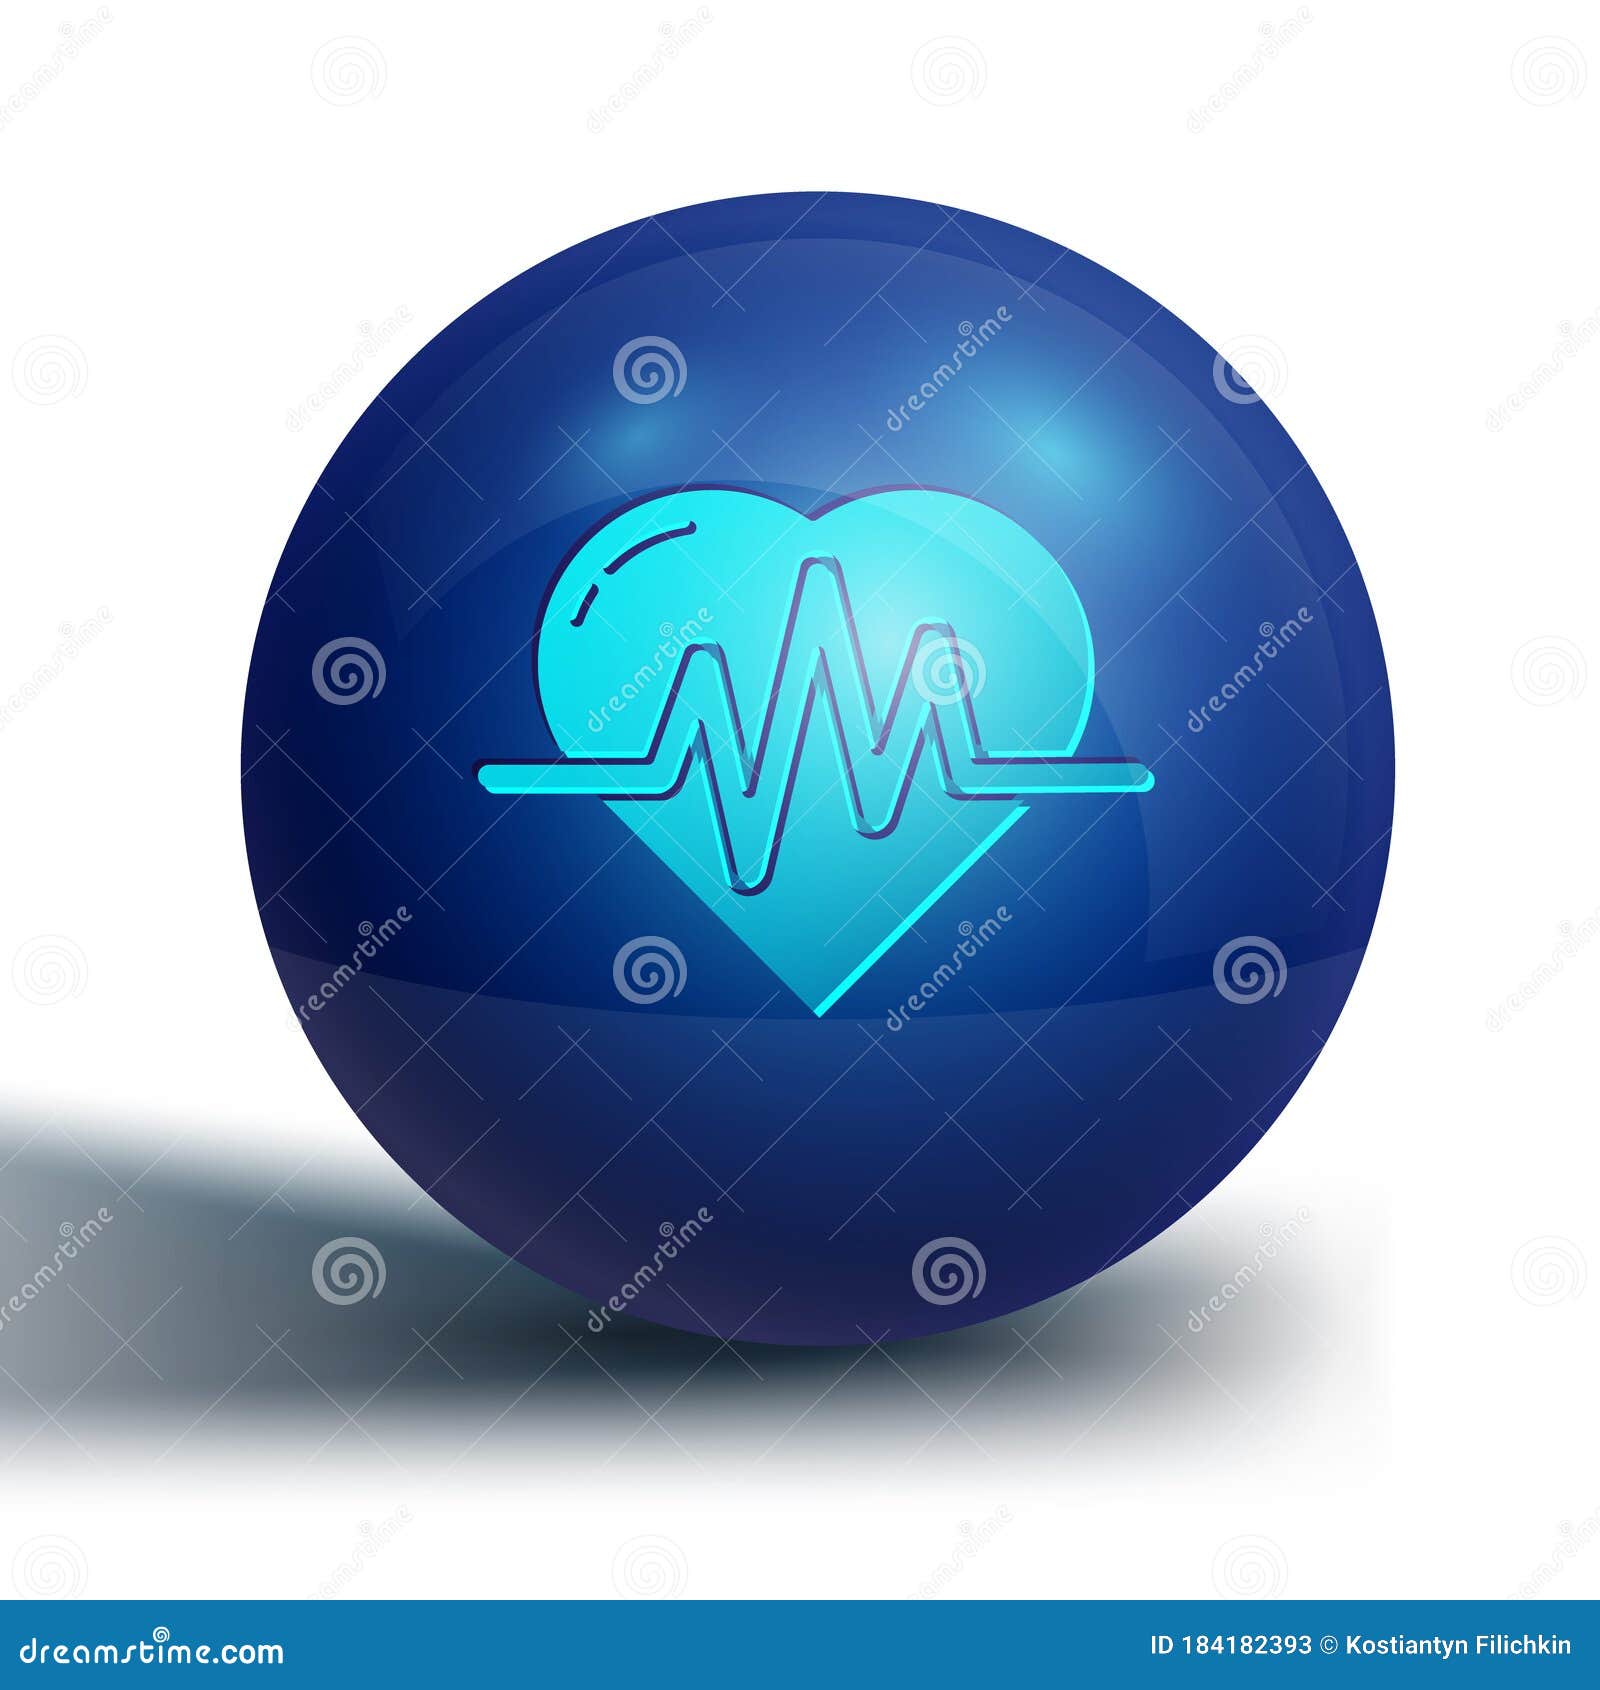 Blue Heart rate icon isolated on white background. Heartbeat sign. Heart pulse icon. Cardiogram icon. Blue circle button. Vector Illustration.